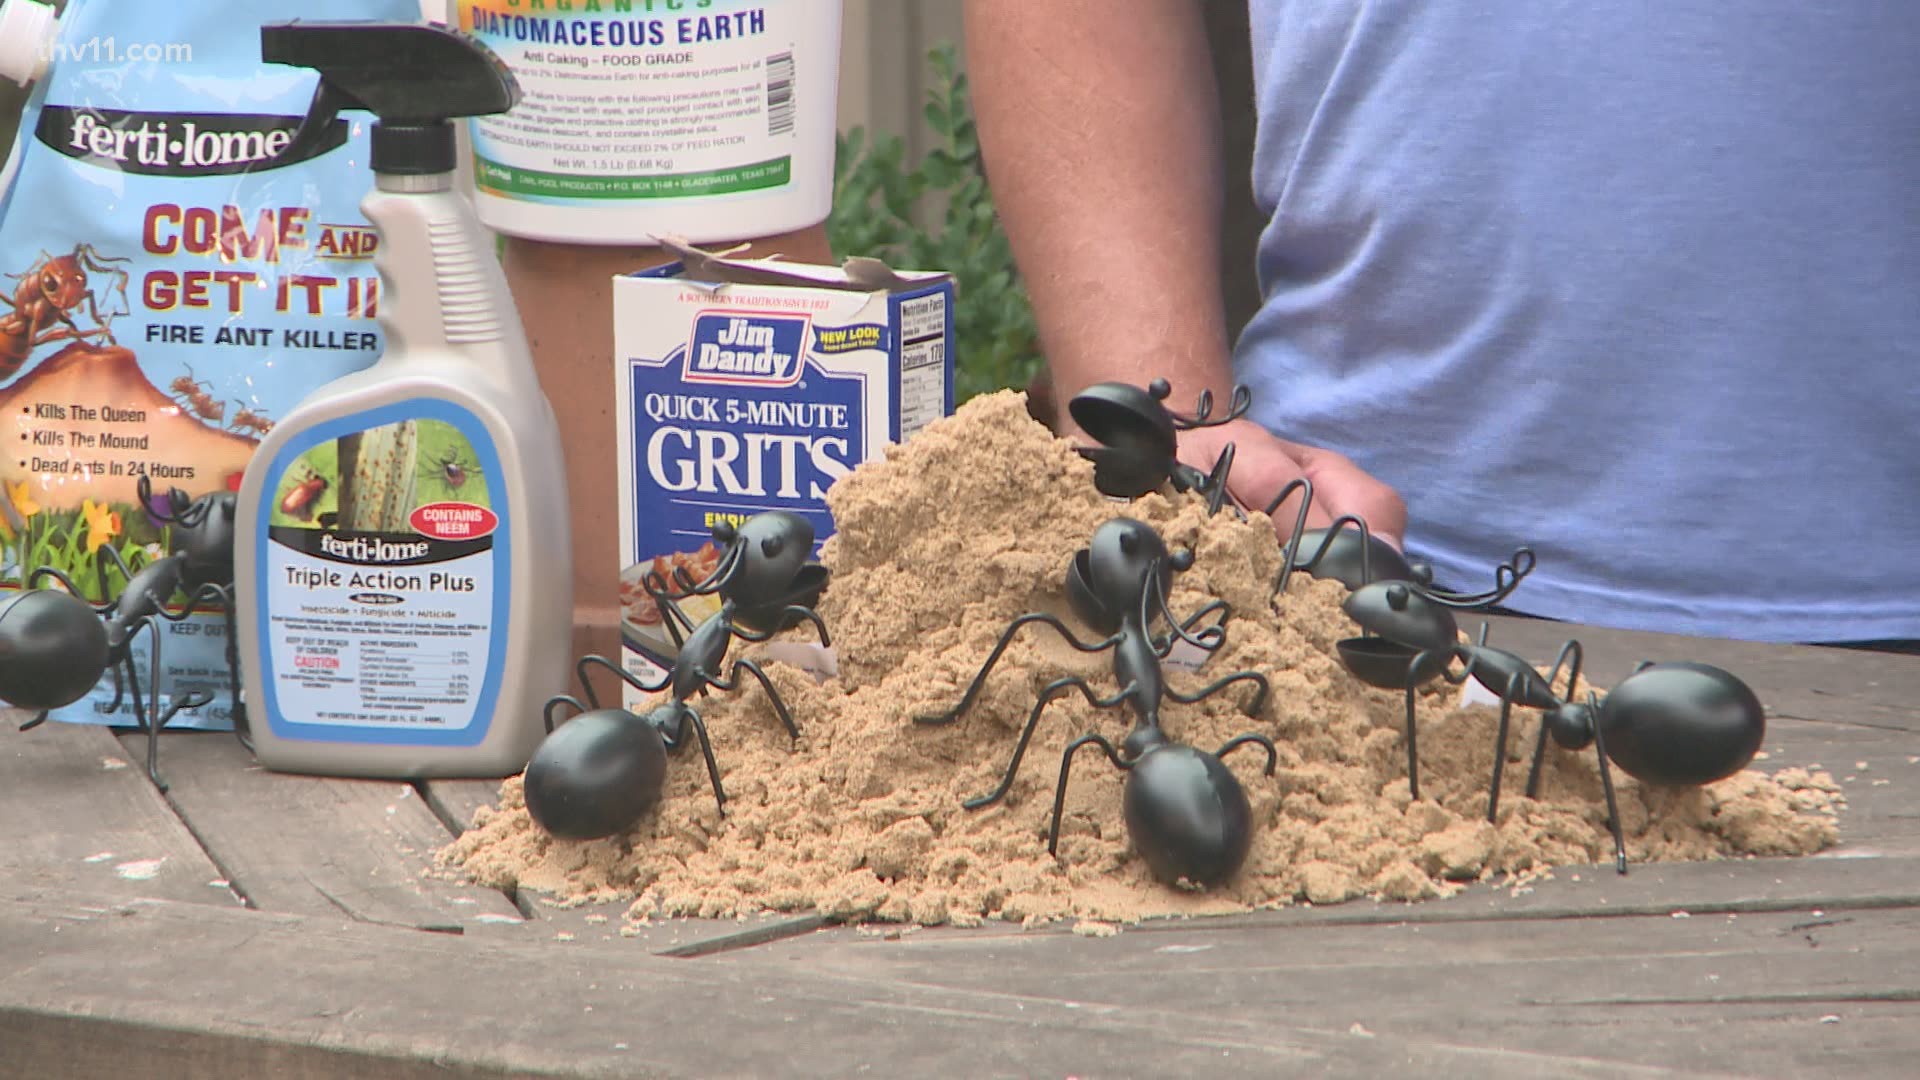 Chris H. Olsen shares tips and products that can help get rid of fire ants in your yard.